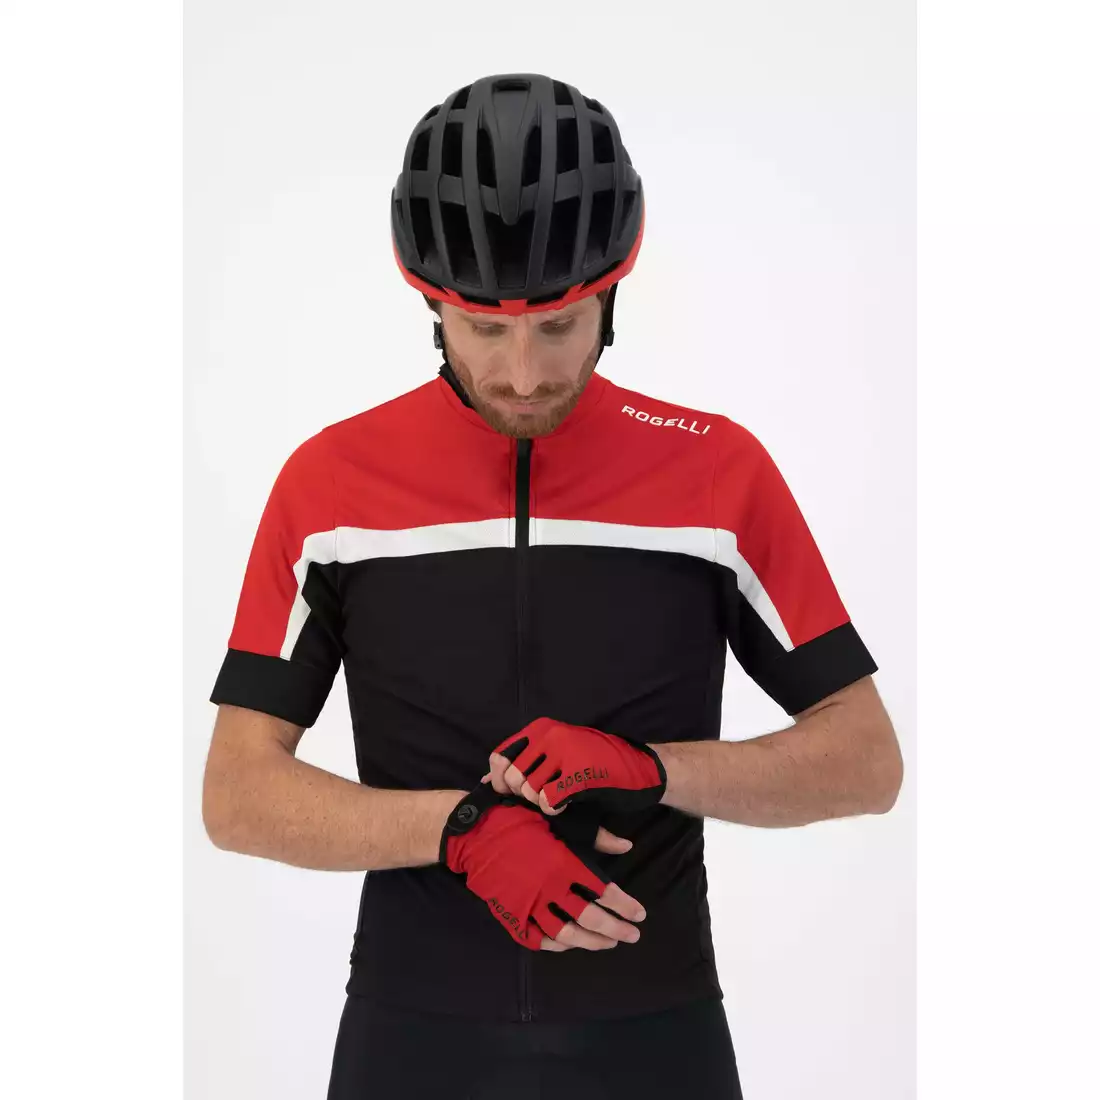 ROGELLI CORE Men's cycling gloves, red